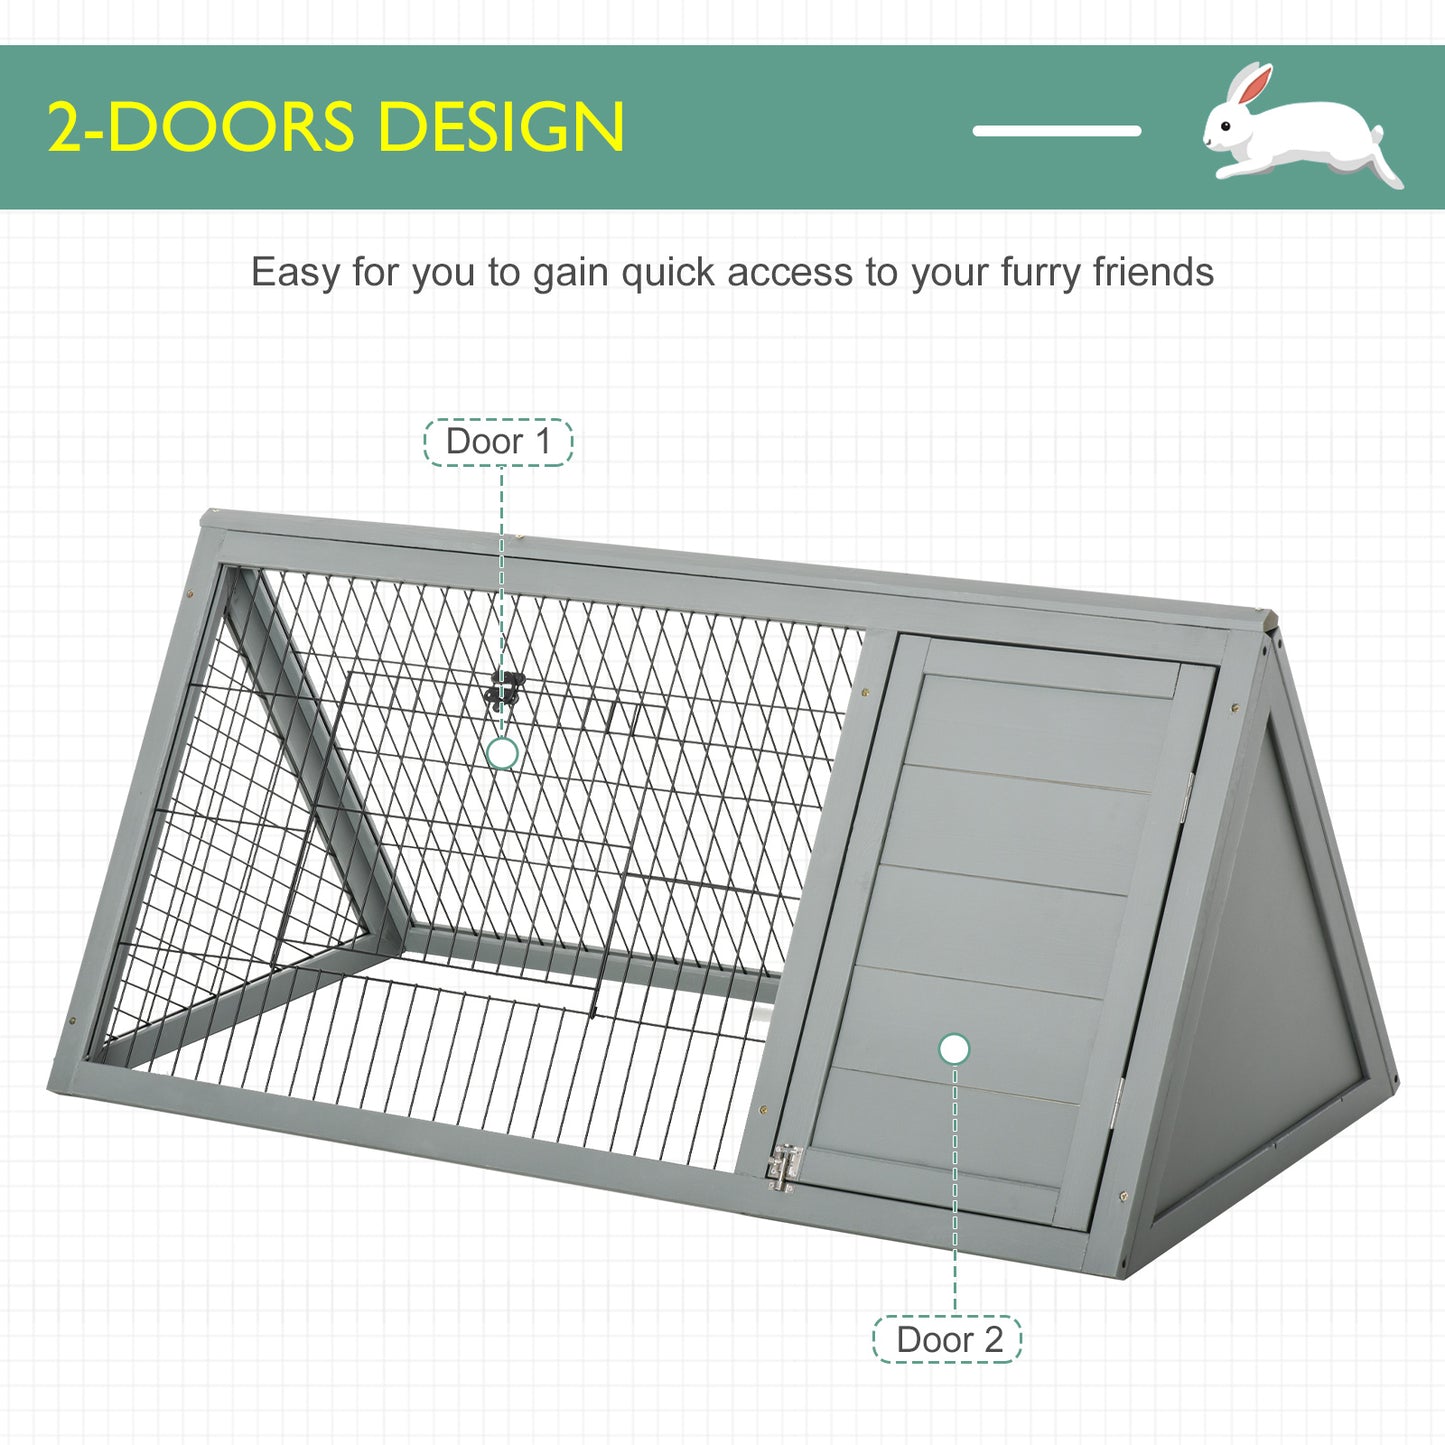 PawHut Wooden Rabbit Cage Small Animal Hutch w/ Outside Area - Grey